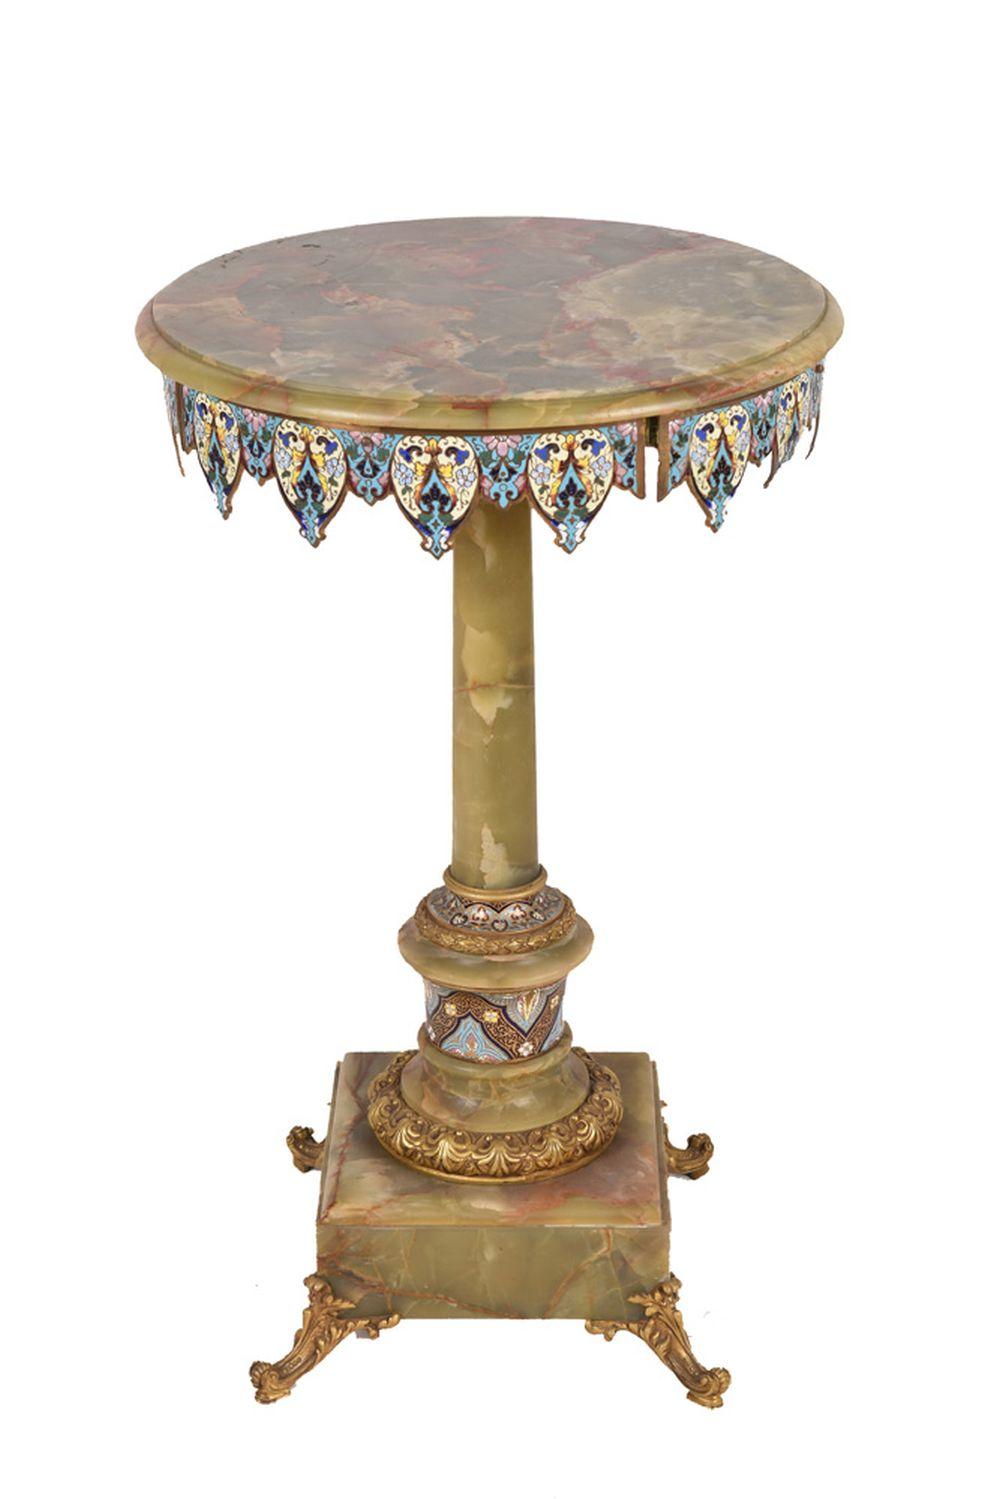 FRENCH CHAMPLEVE & ONYX TABLE20